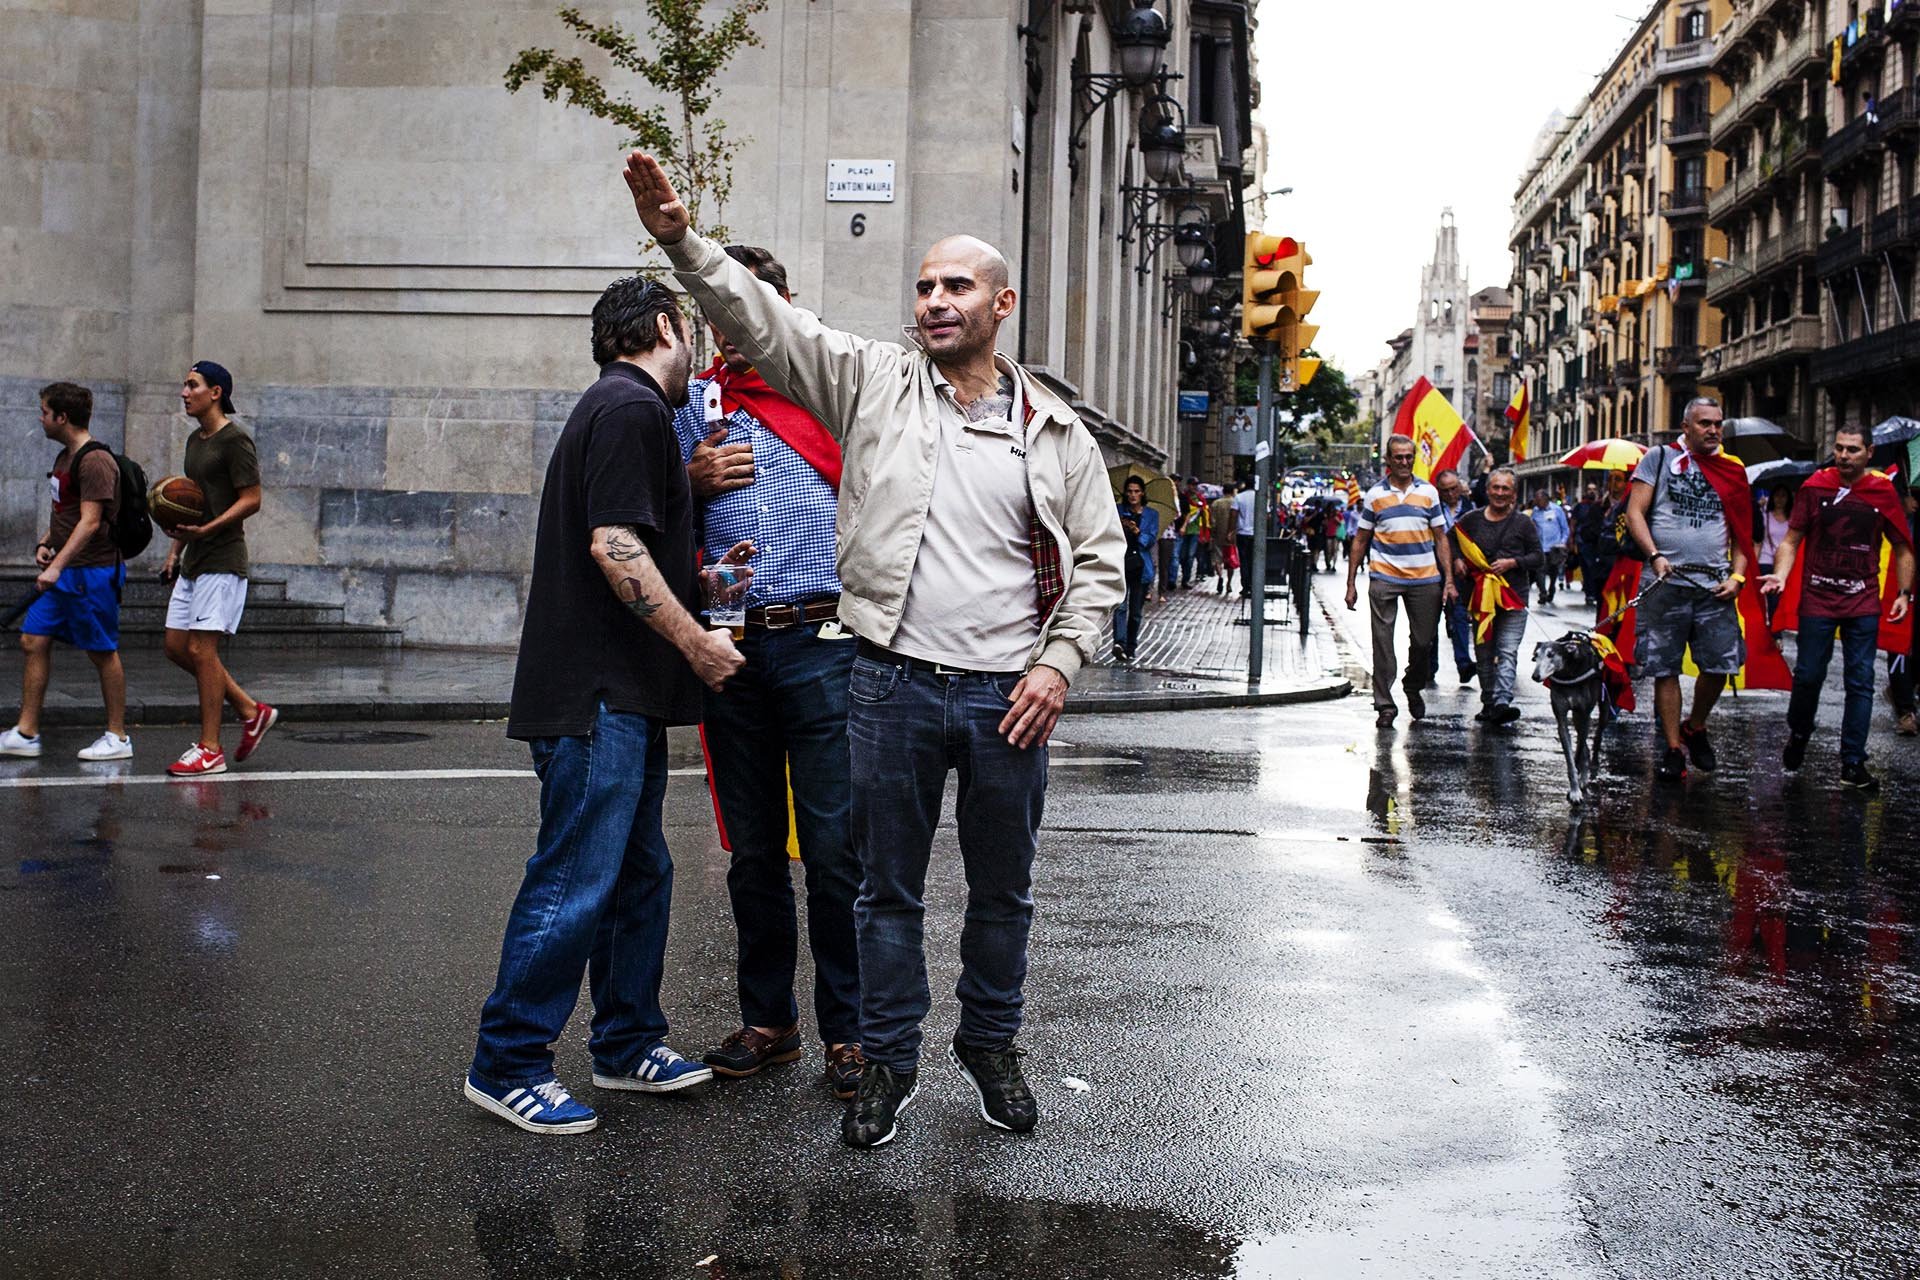 A man doing a fascist greeting in an act in favor of the union of Spain and against the referendum of Catalan self-determination, made the day before the referendum declared illegal by the Spanish Government.